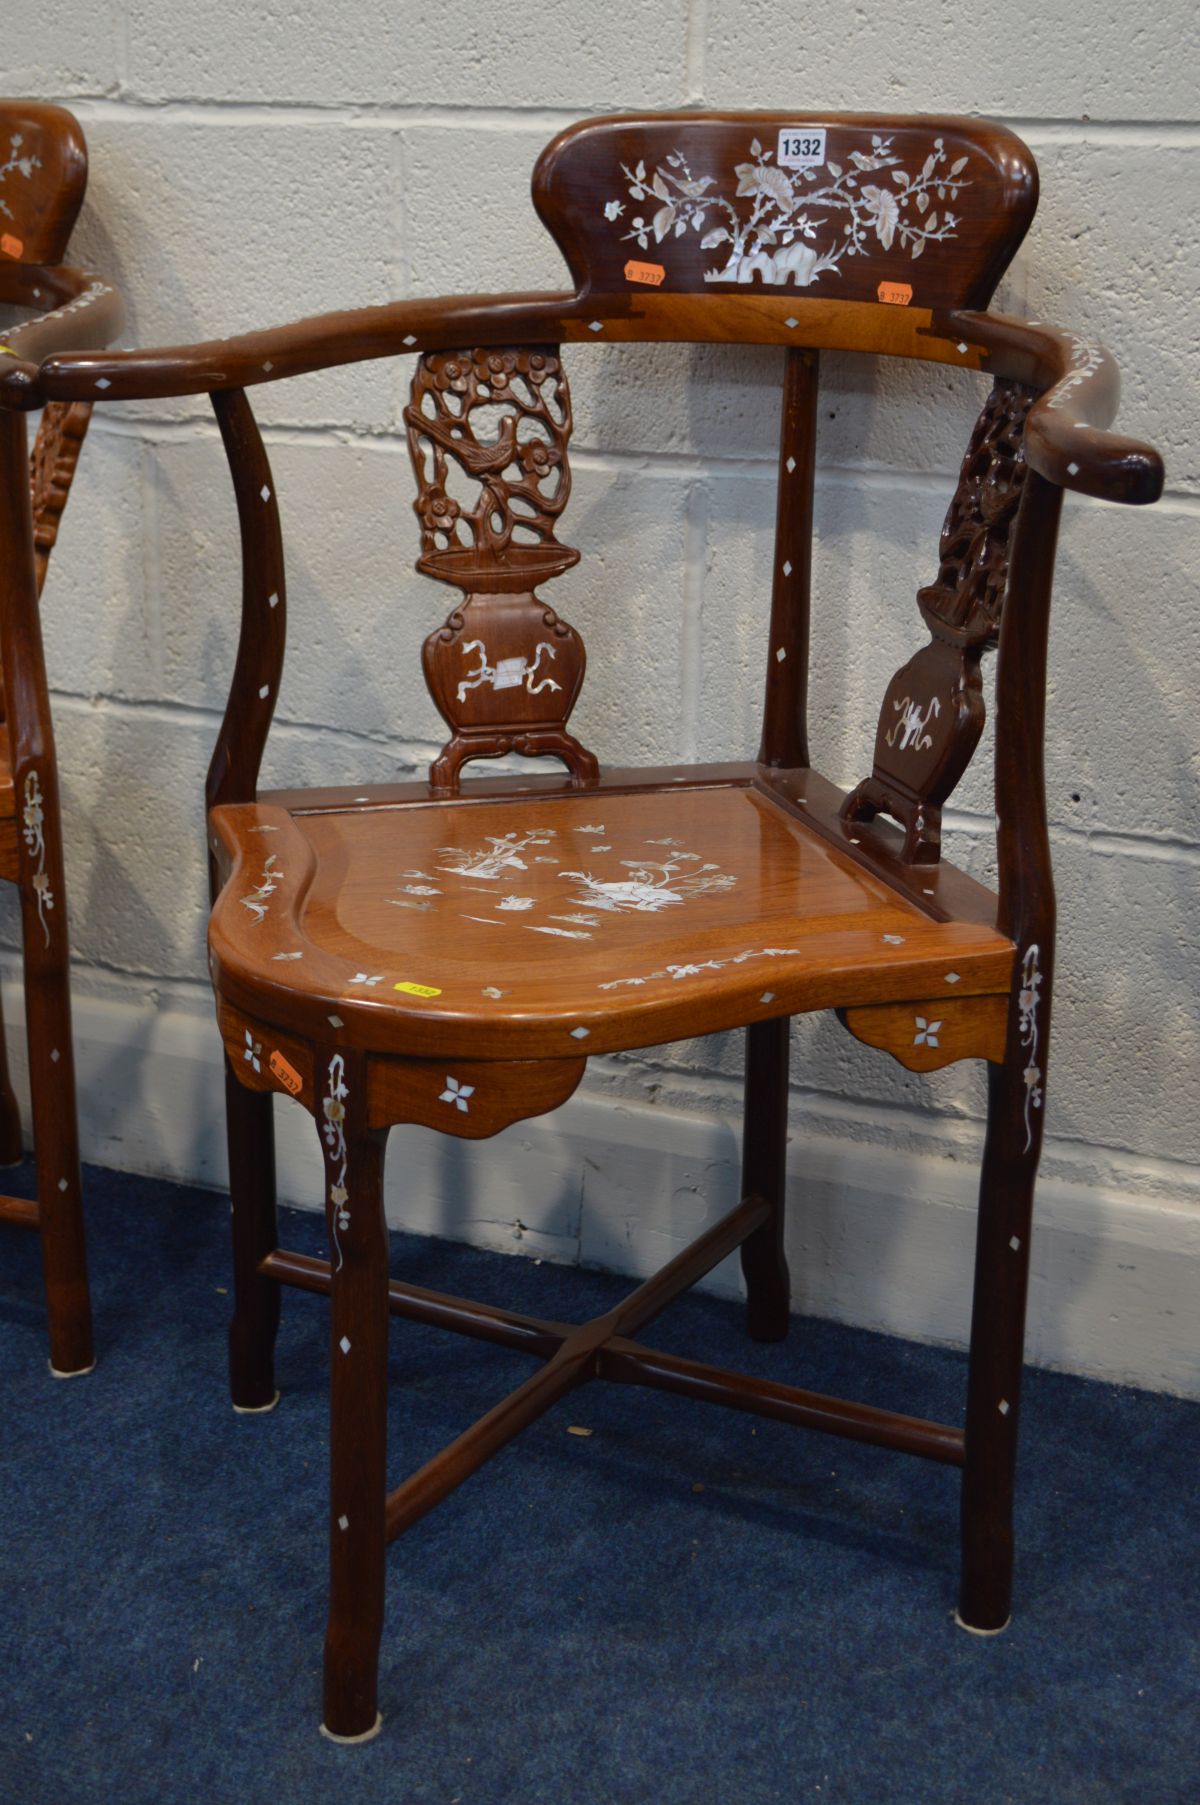 A NEAR PAIR OF MID TO LATE 20TH CENTURY ORIENTAL HARDWOOD CORNER CHAIRS, with mother of pearl - Image 2 of 7